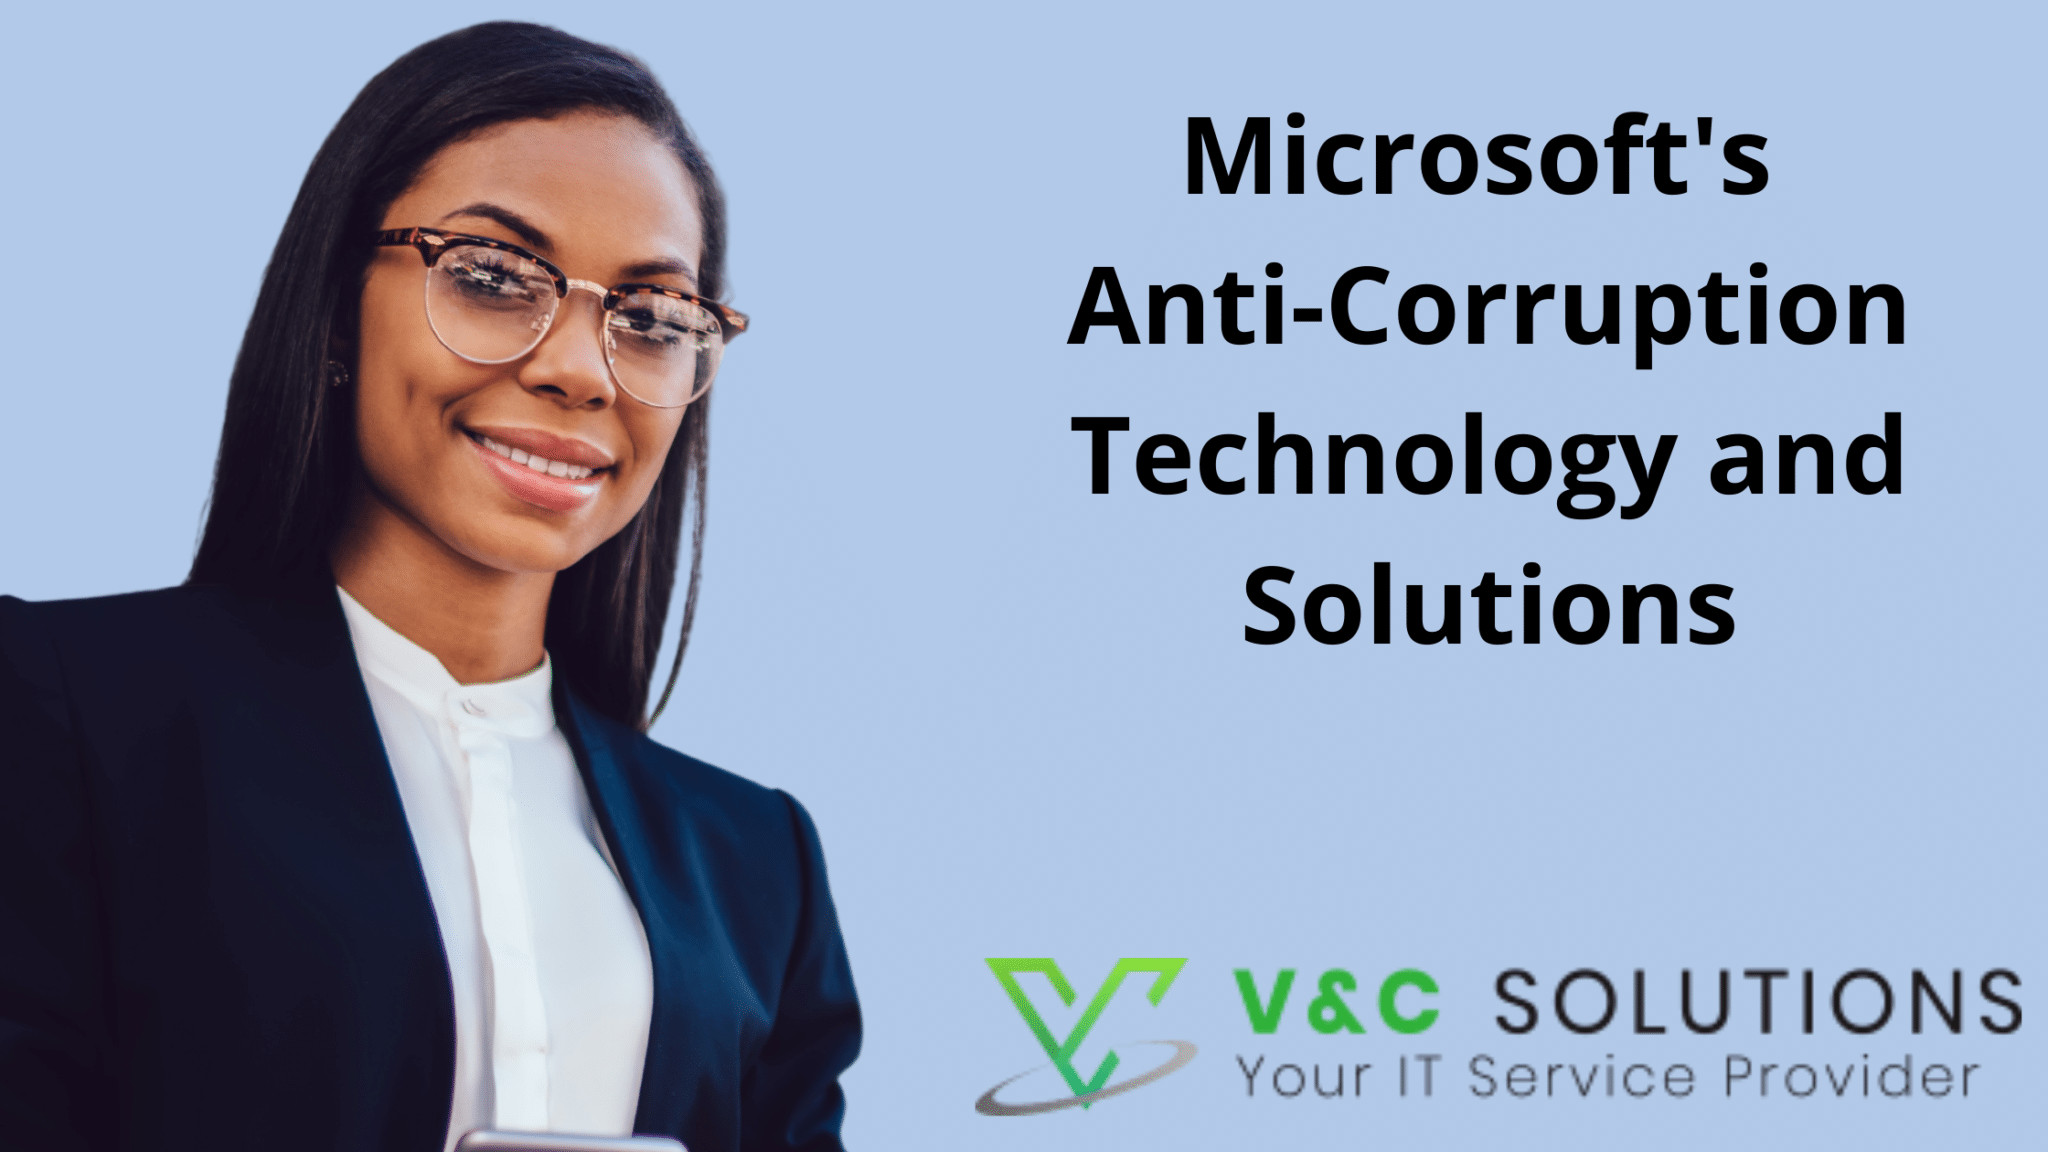 Microsoft’s Anti-Corruption Technology and Solutions